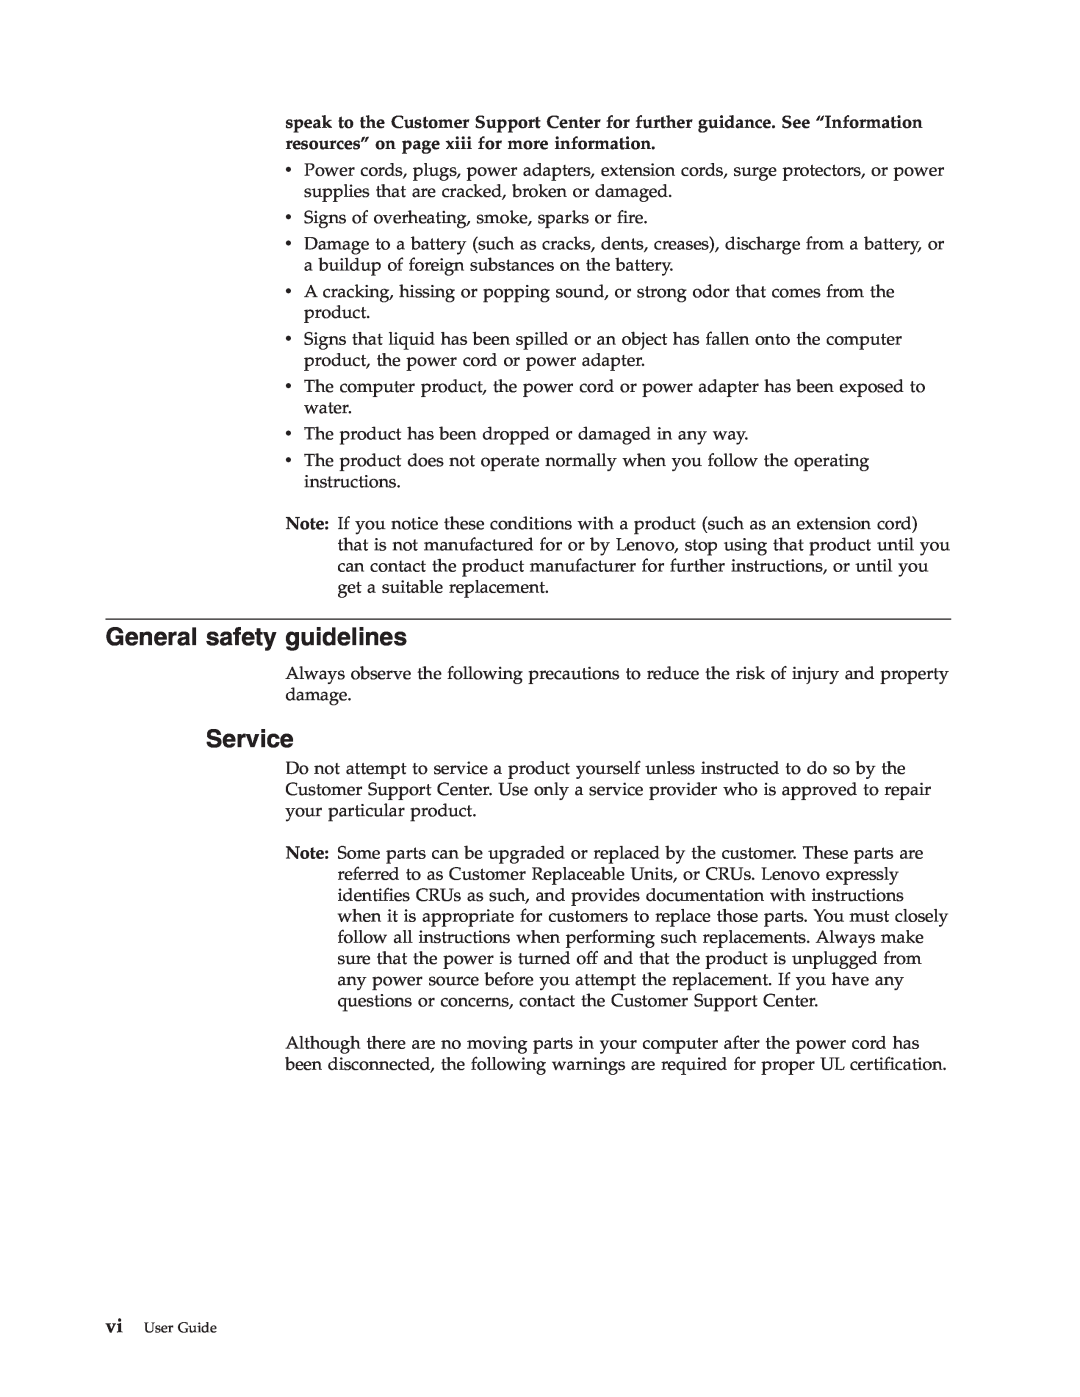 Lenovo 9212, 9213 manual General safety guidelines, Service 